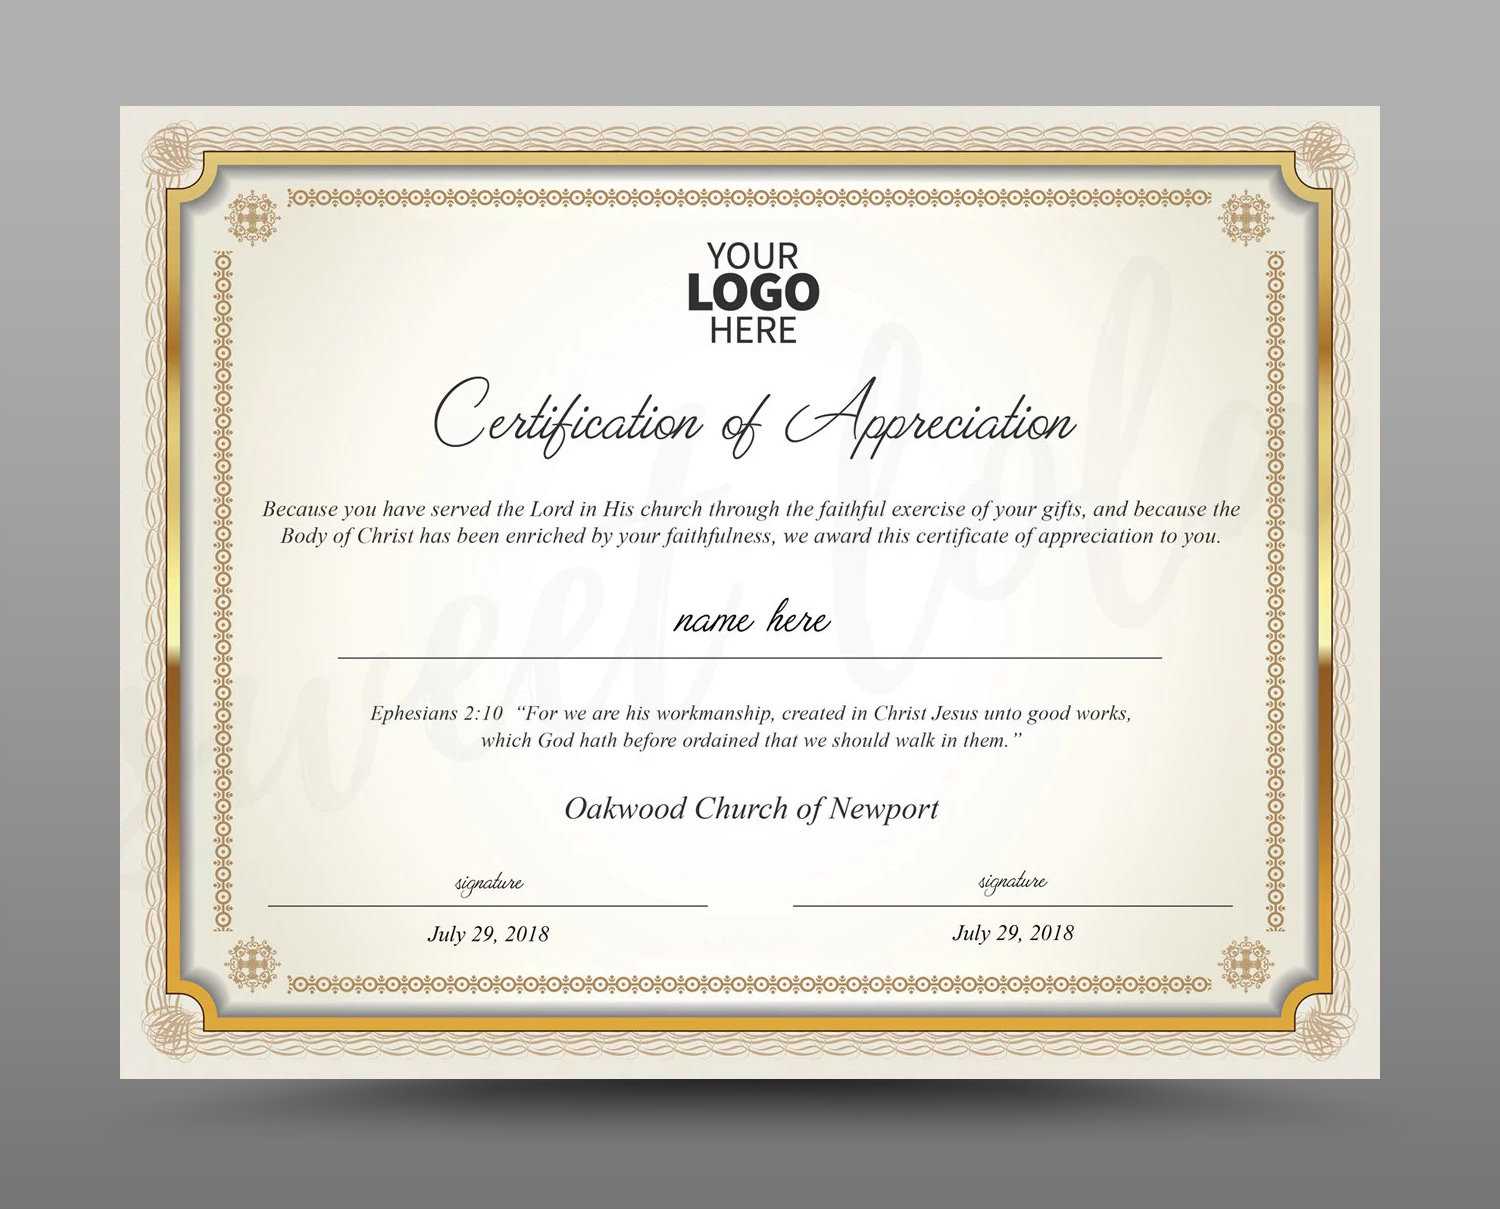 Certificate Template, Instant Download Certificate Of Appreciation –  Editable Ms Word Doc And Photoshop File Included Regarding Walking Certificate Templates